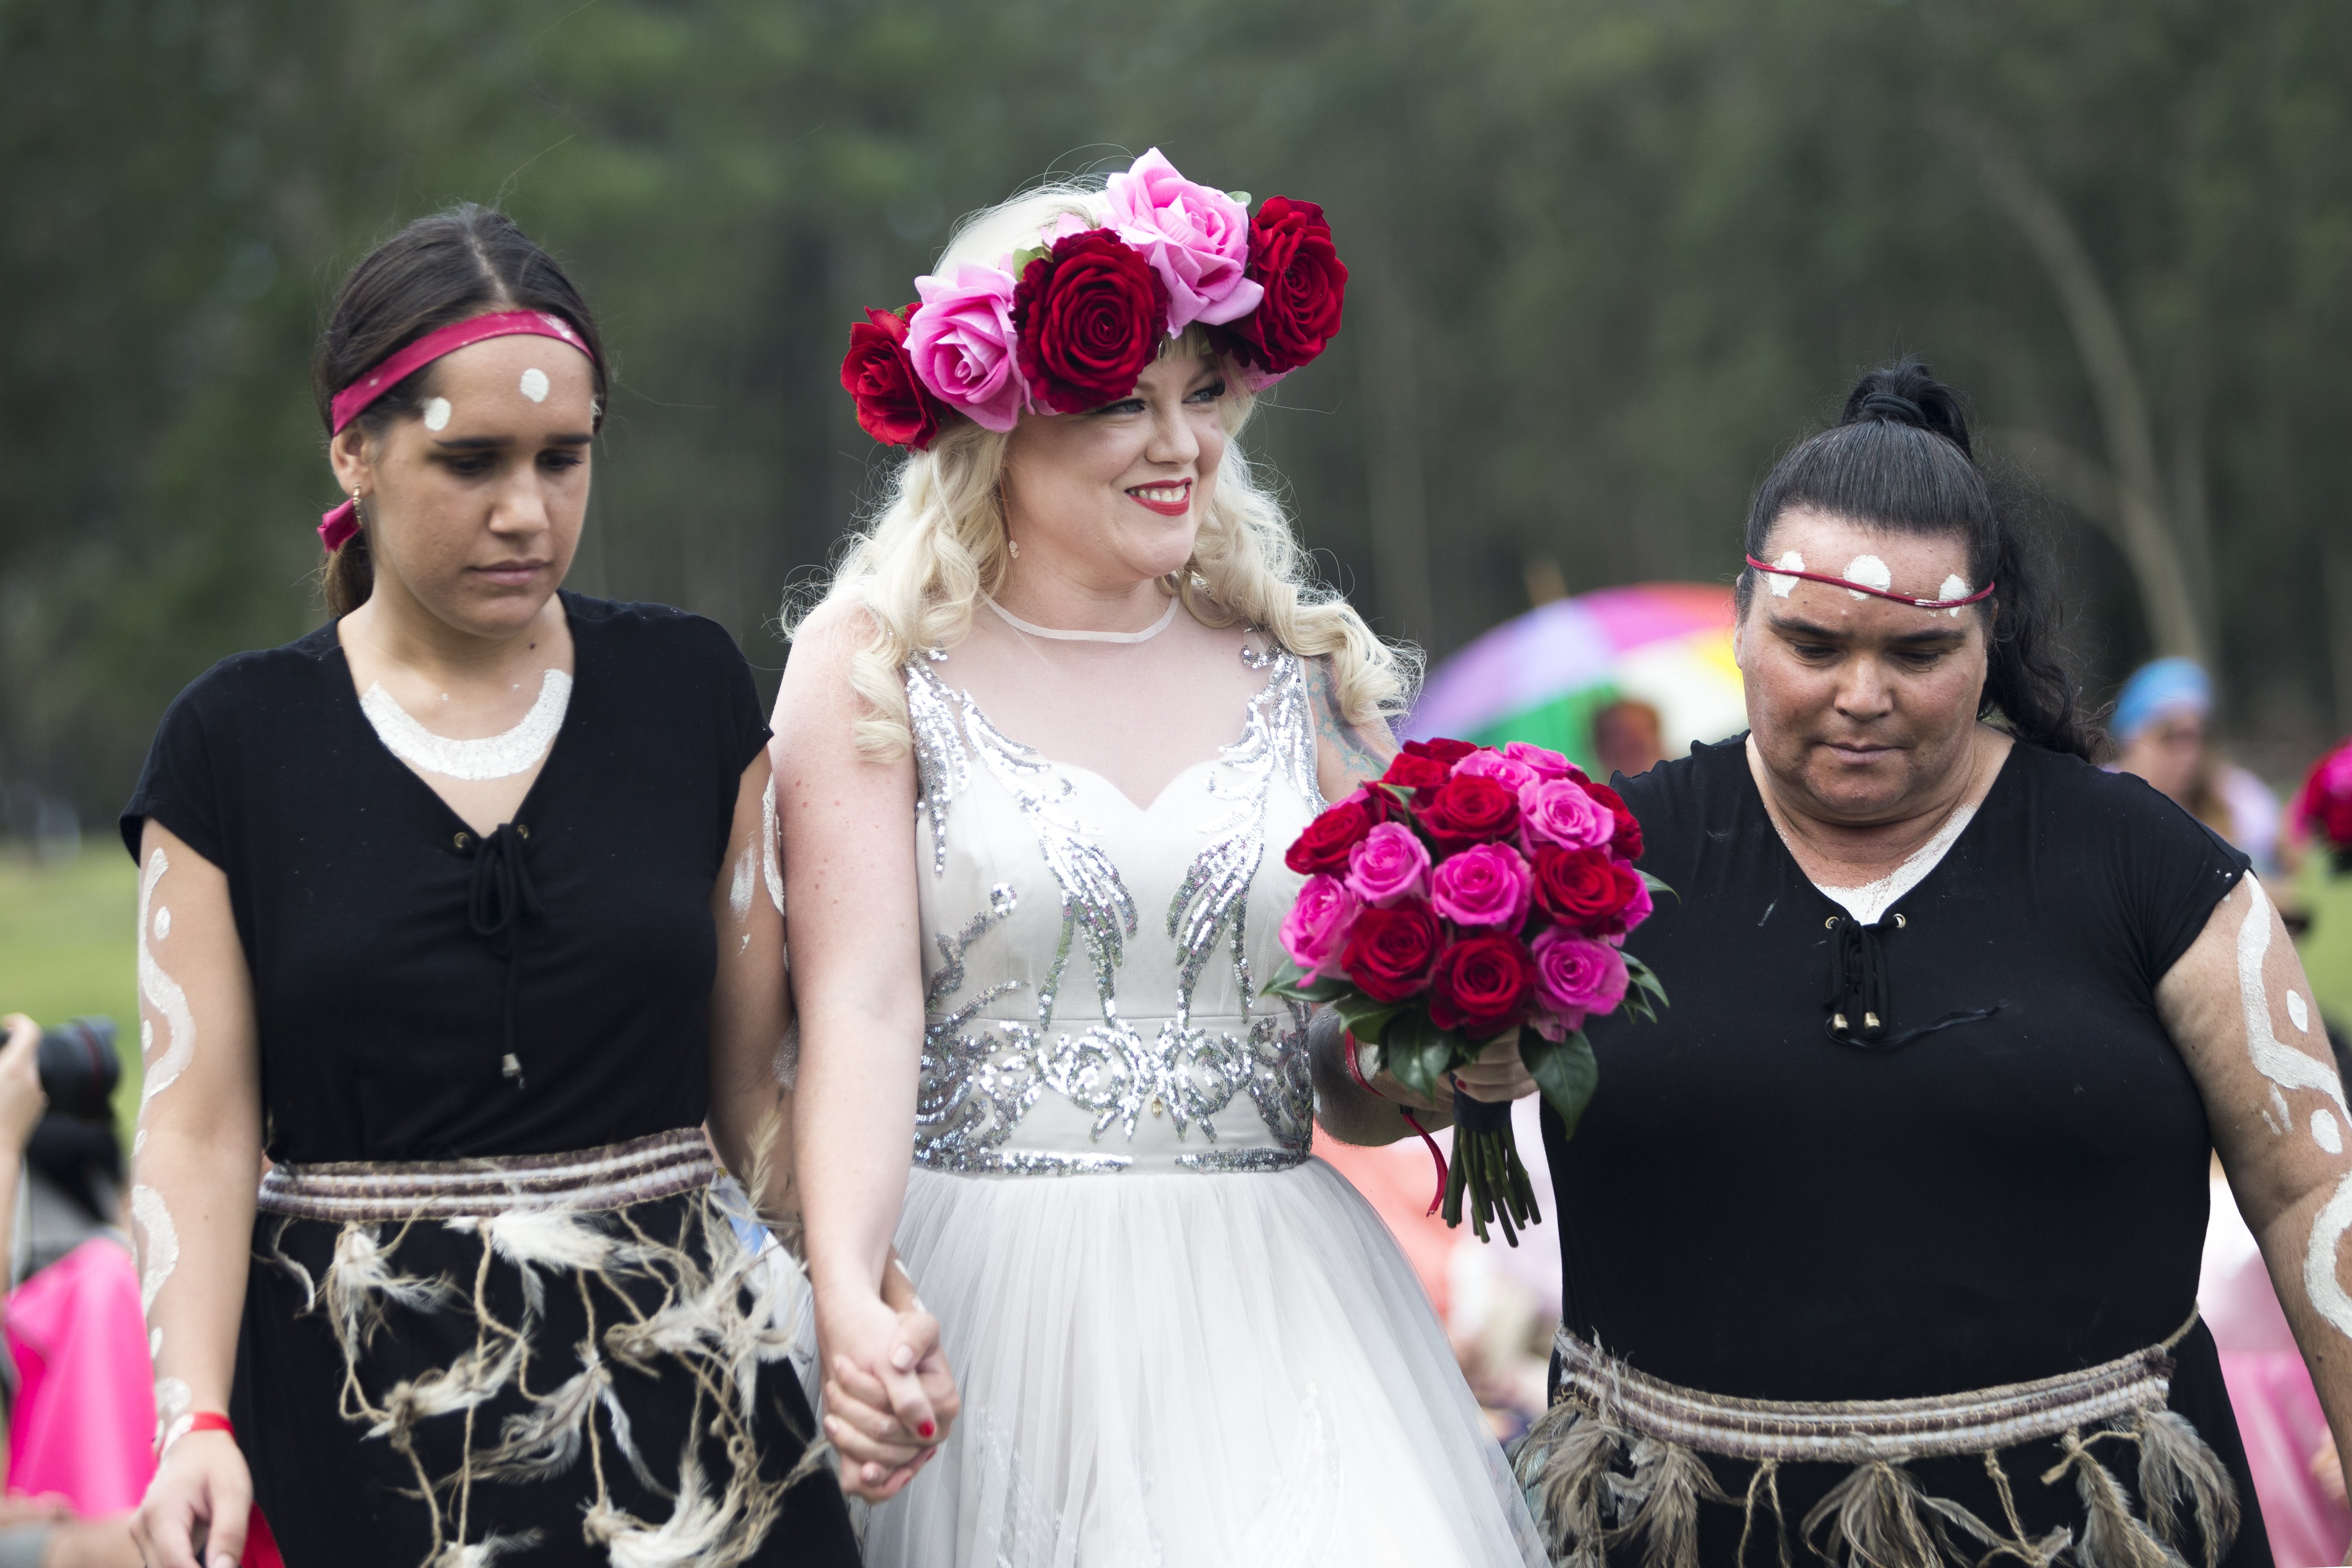 Local wedding becomes a 'festival of love' at Mogo